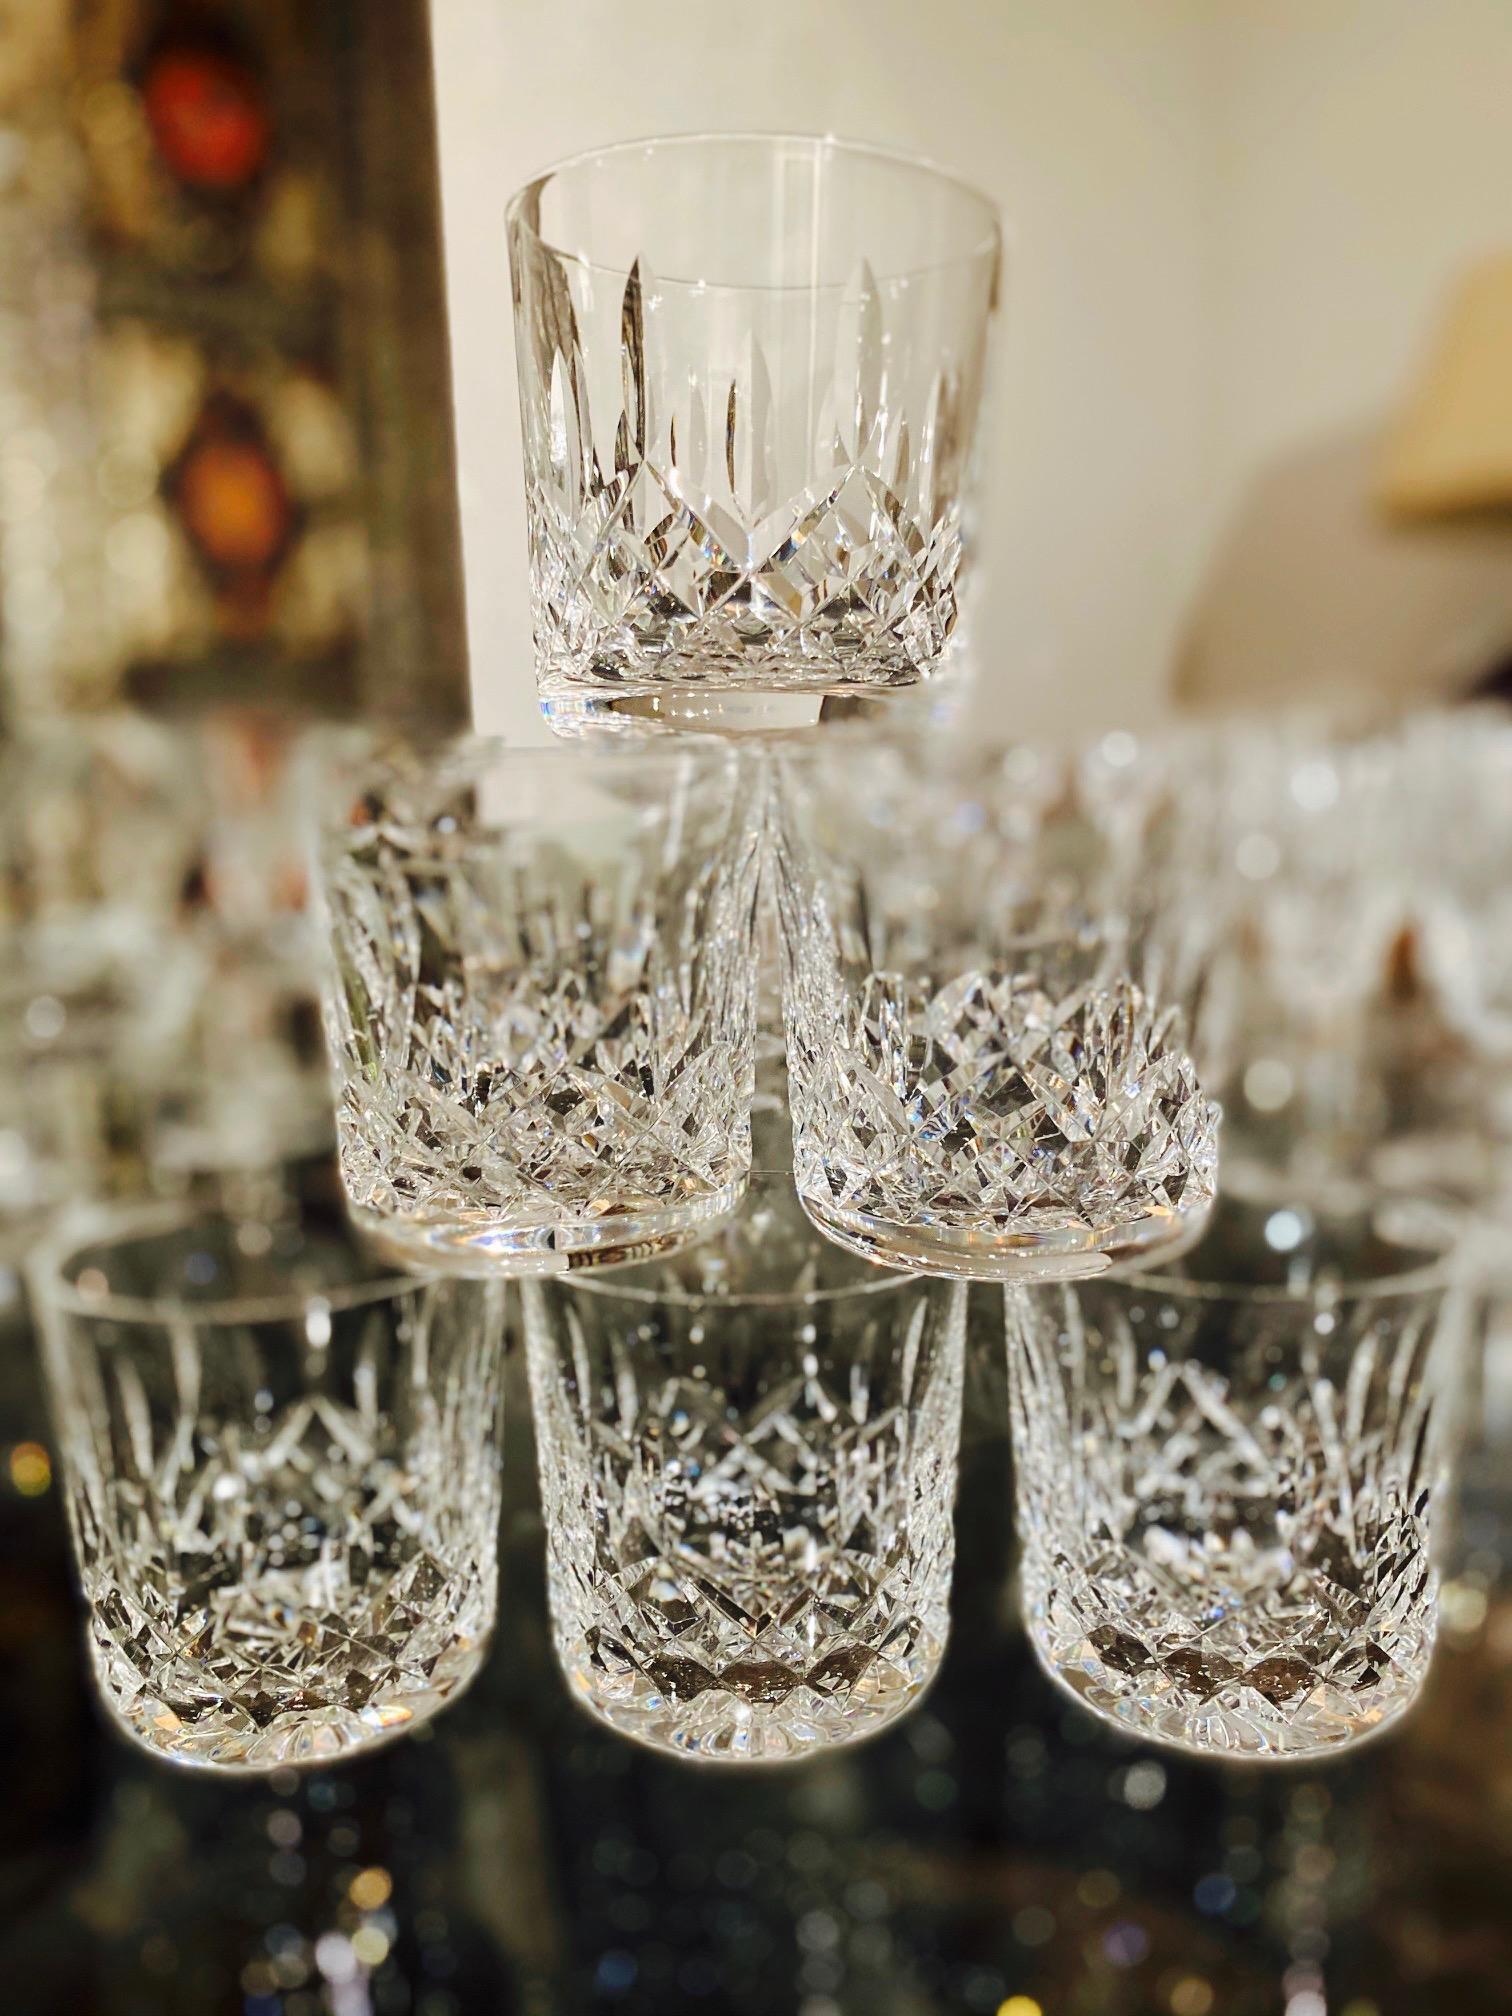 Set of six luxury crystal rock whiskey glasses from Waterford Crystal. The Lismore Collection is perhaps Waterford's most distinguished design featuring hand blown crystal with the pattern's signature diamond and wedge cuts. First introduced in the